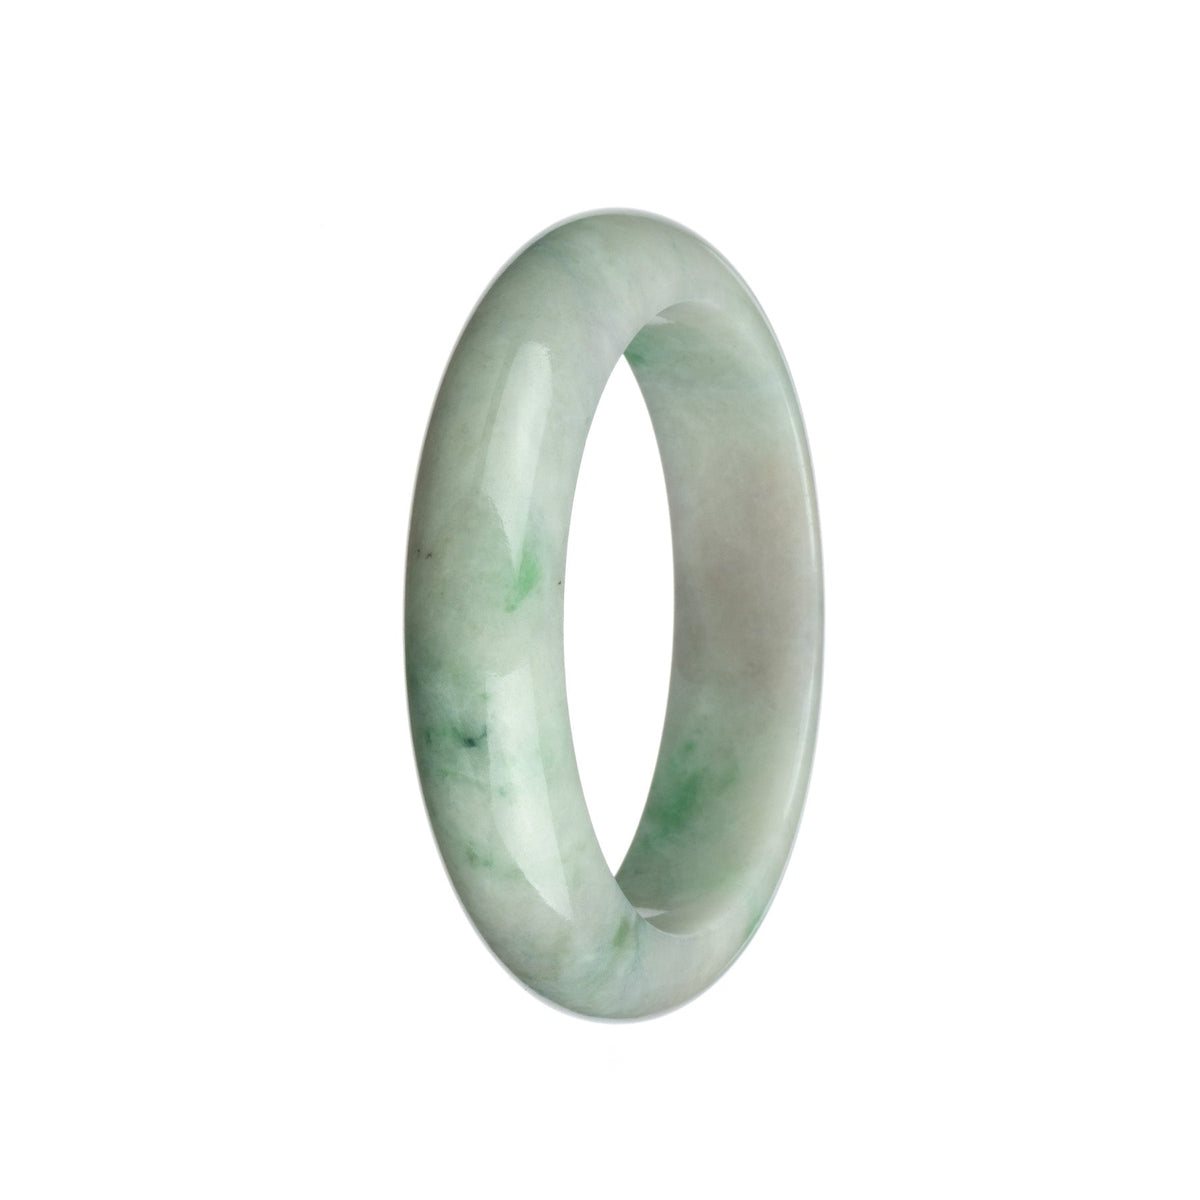 Real Grade A White with Apple Green Traditional Jade Bracelet - 58mm Half Moon